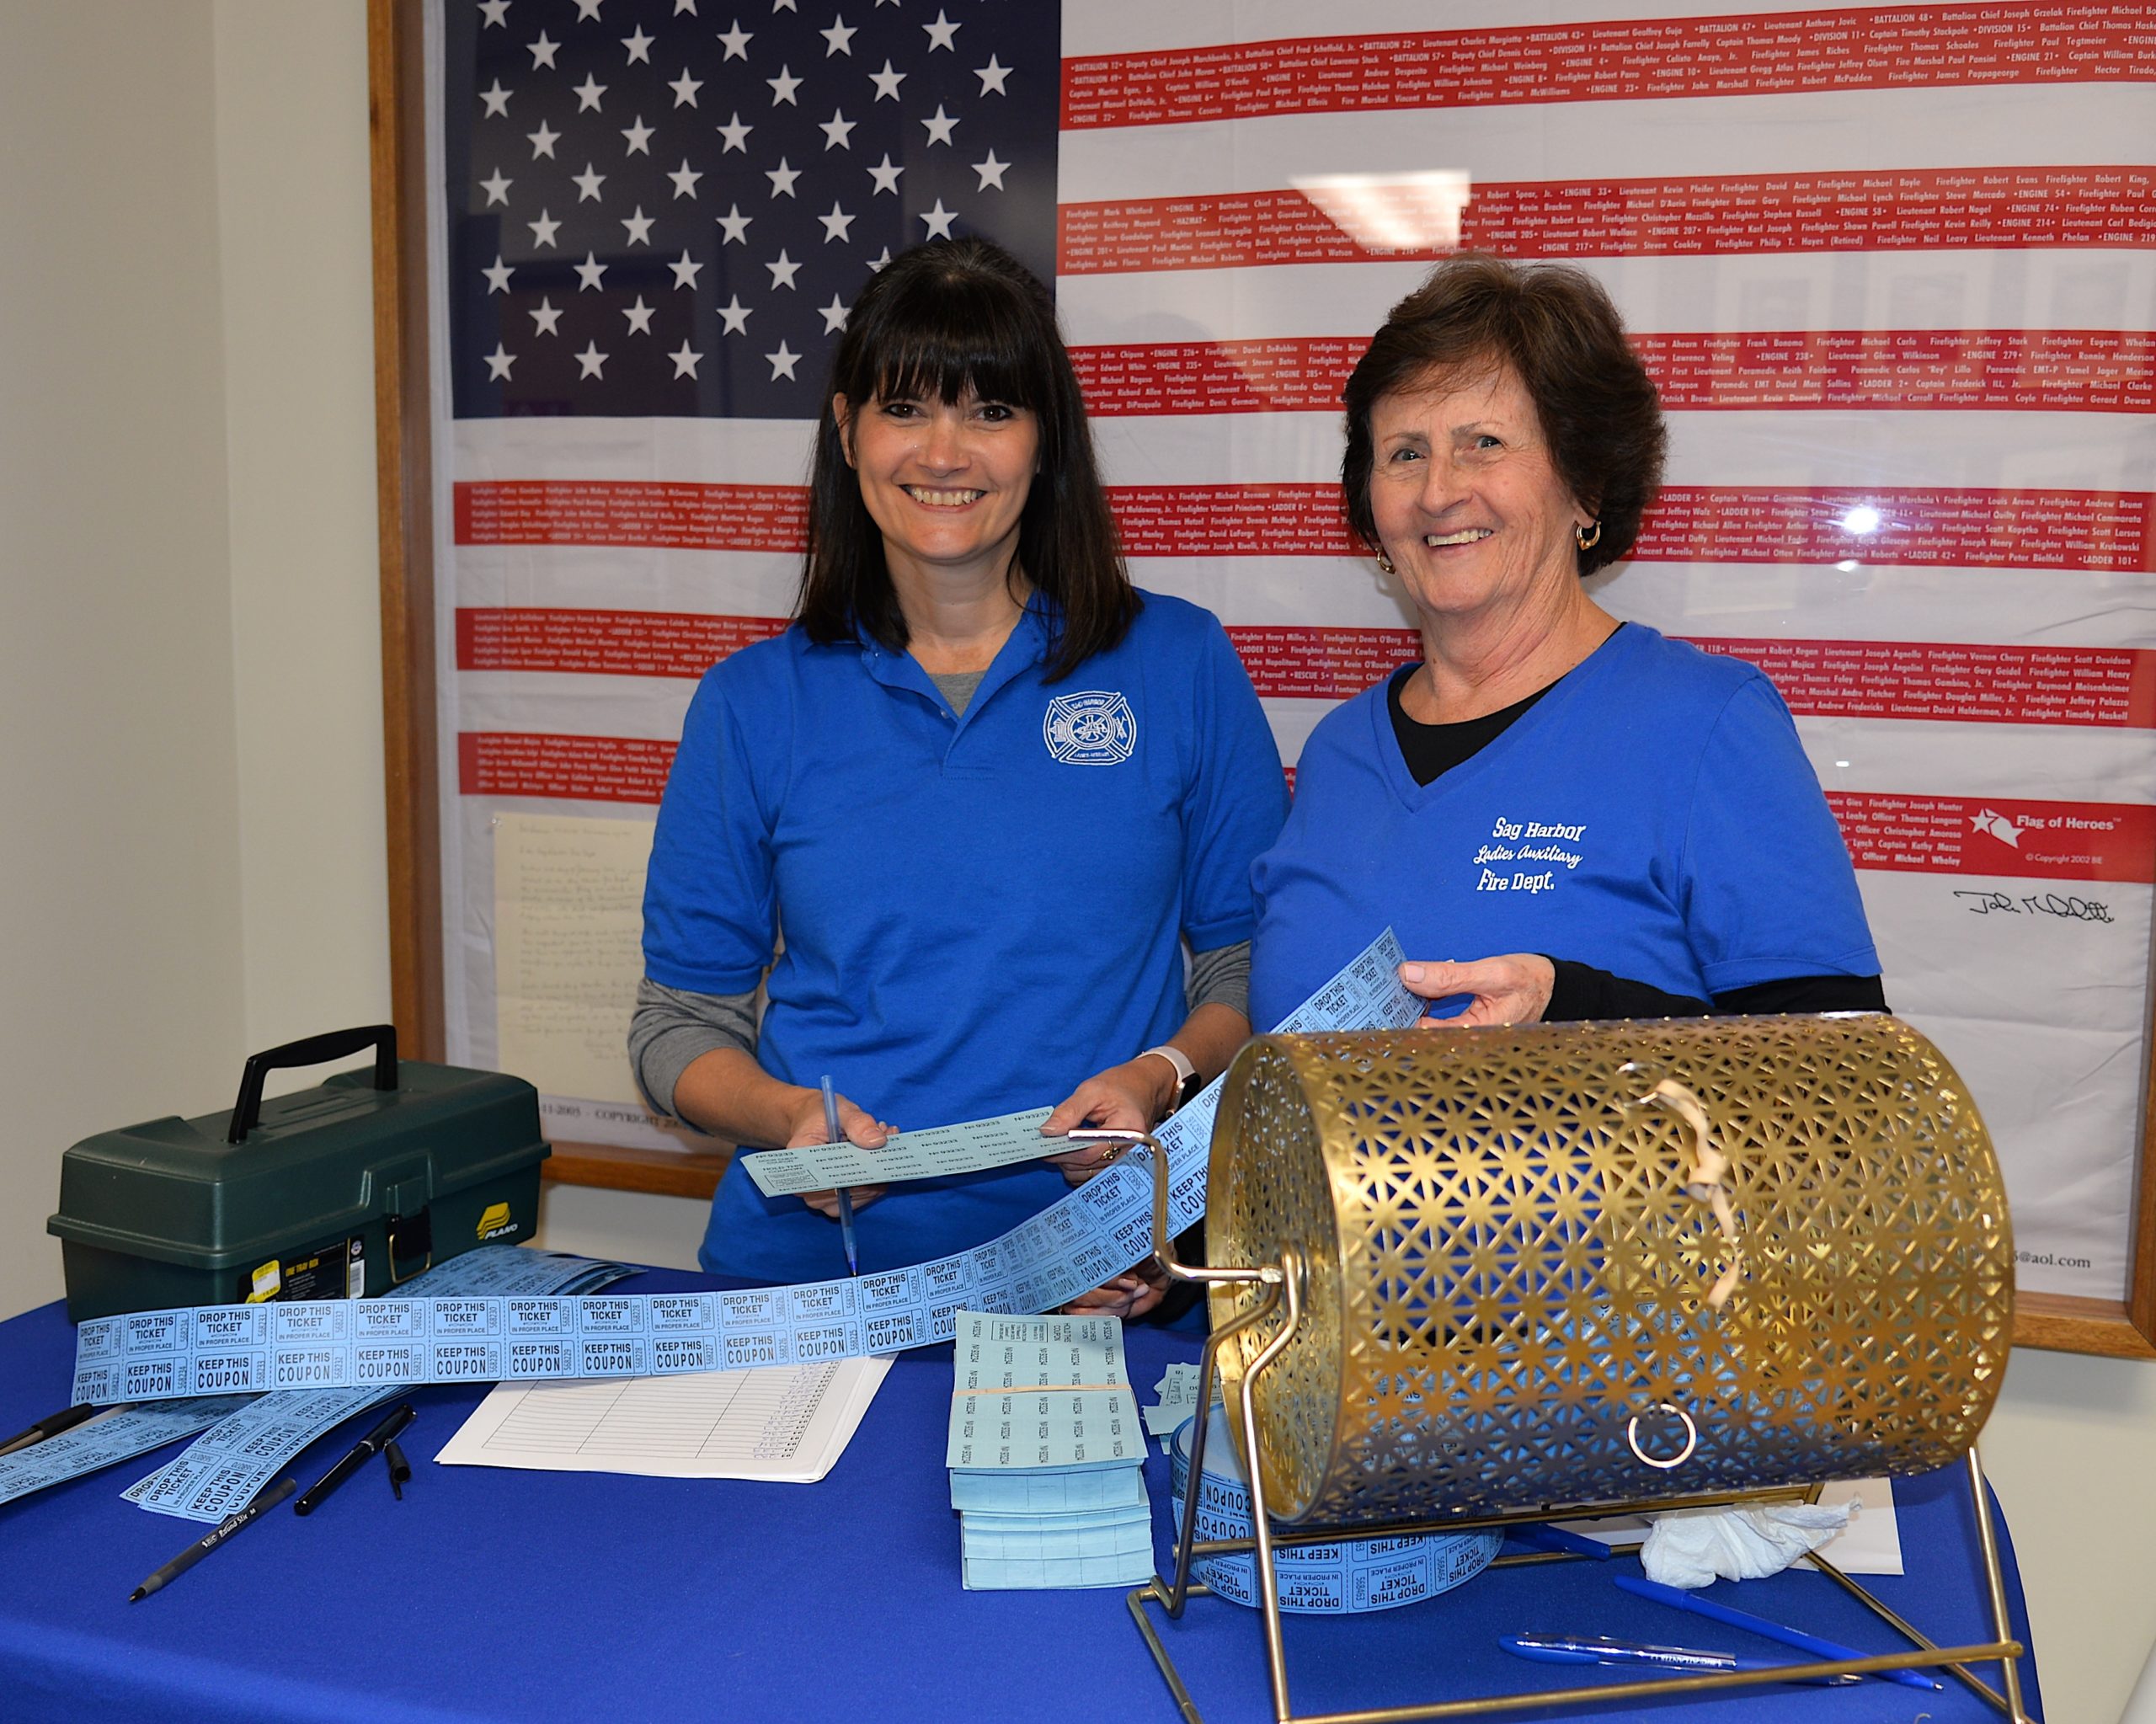 The Ladies Auxilliary of the Sag Harbor Fire Department hosted a holiday sale on Friday. Jody Miller and Betsy Remkus of the Ladies Auxilliary were in charge of the raffle table. KYRIL BROMLEY 